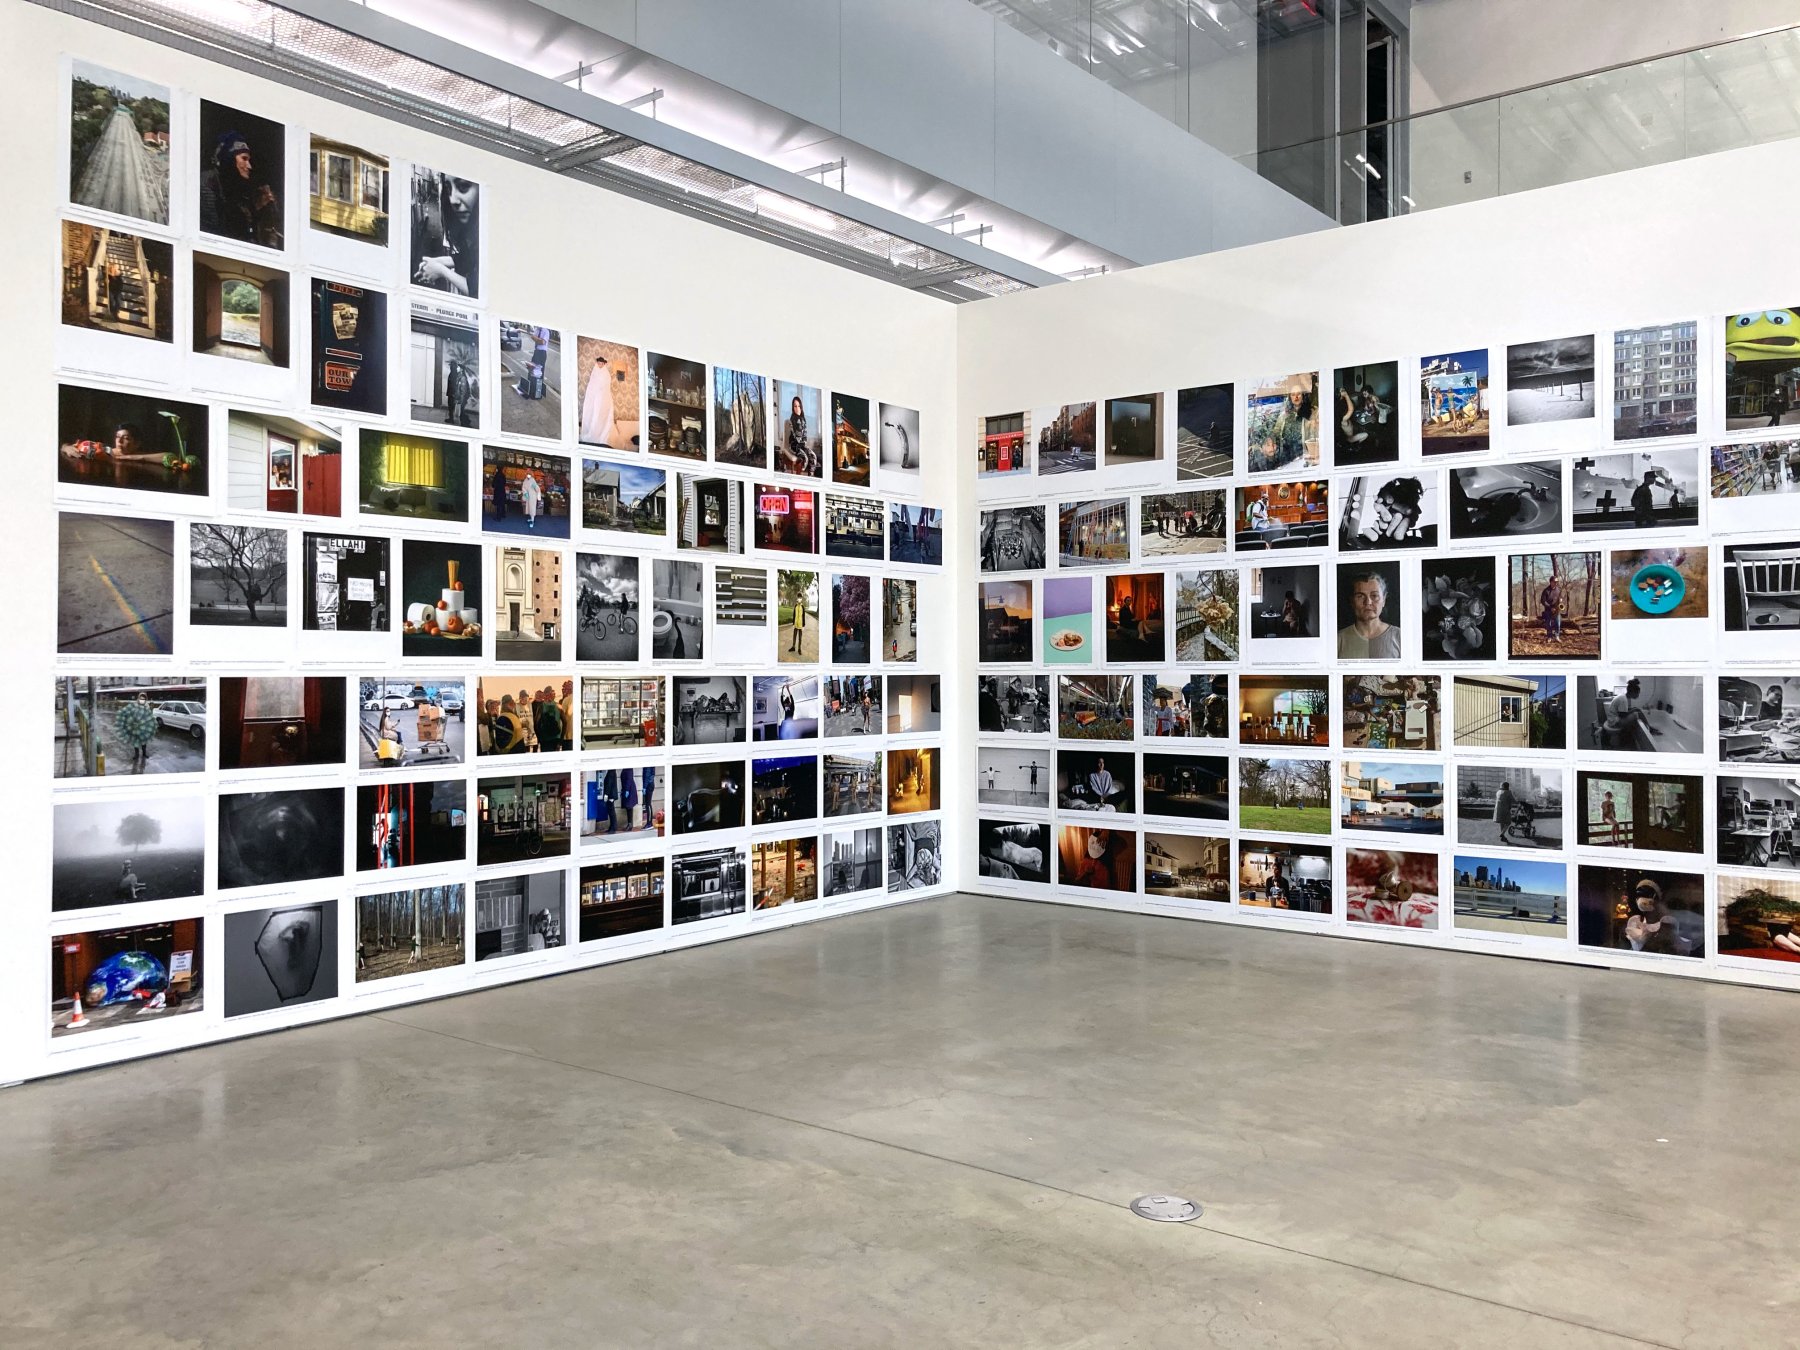 Installation image for #ICPConcerned: Global Images for Global Crisis, at International Center of Photography